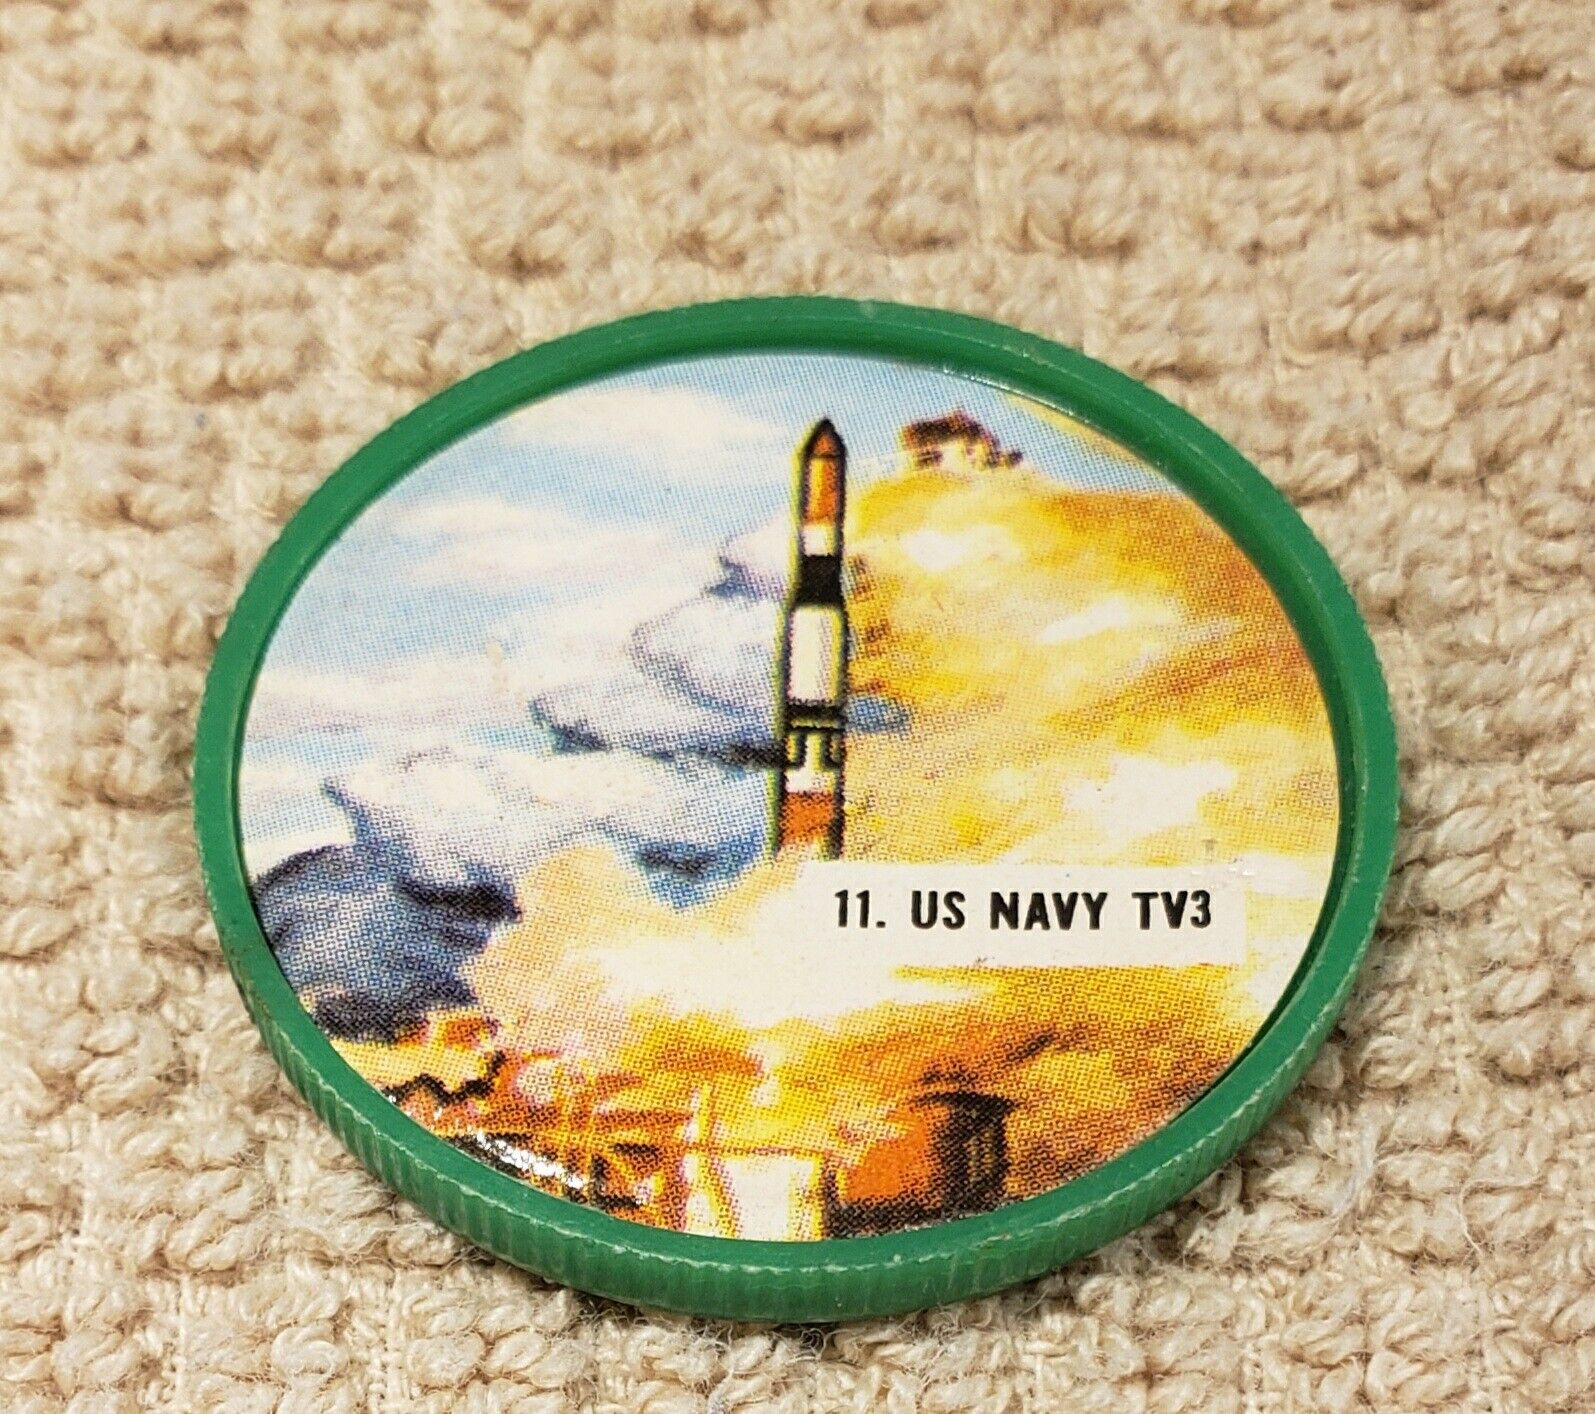 Vintage Advertizing Space Coin